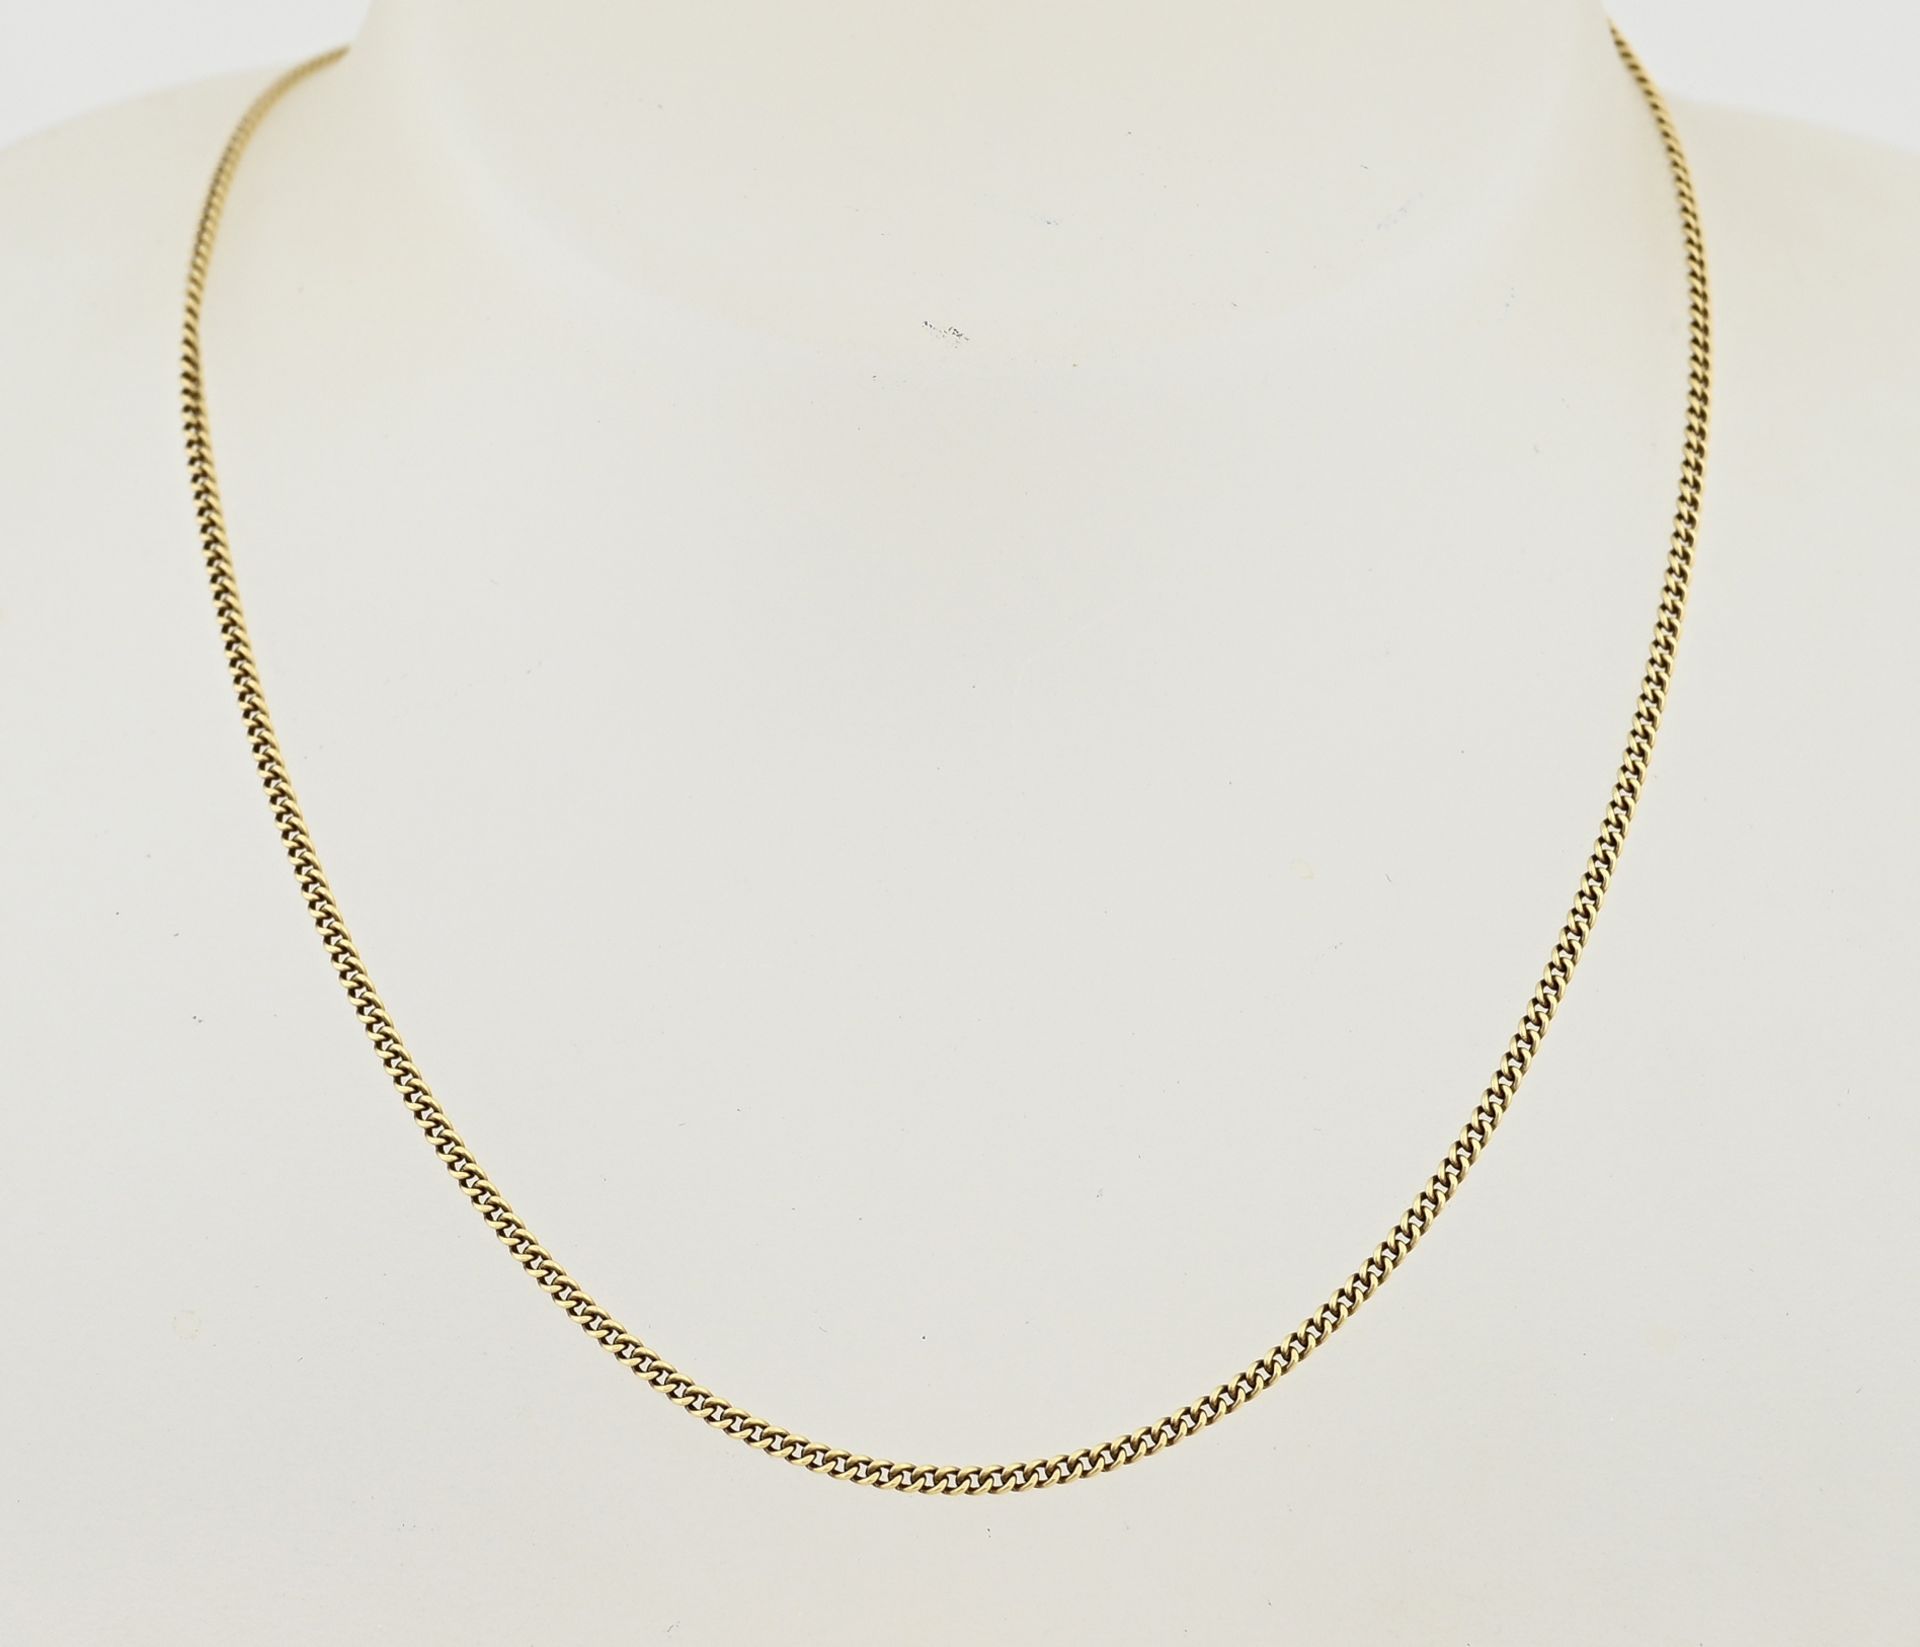 Gold gourmet necklace